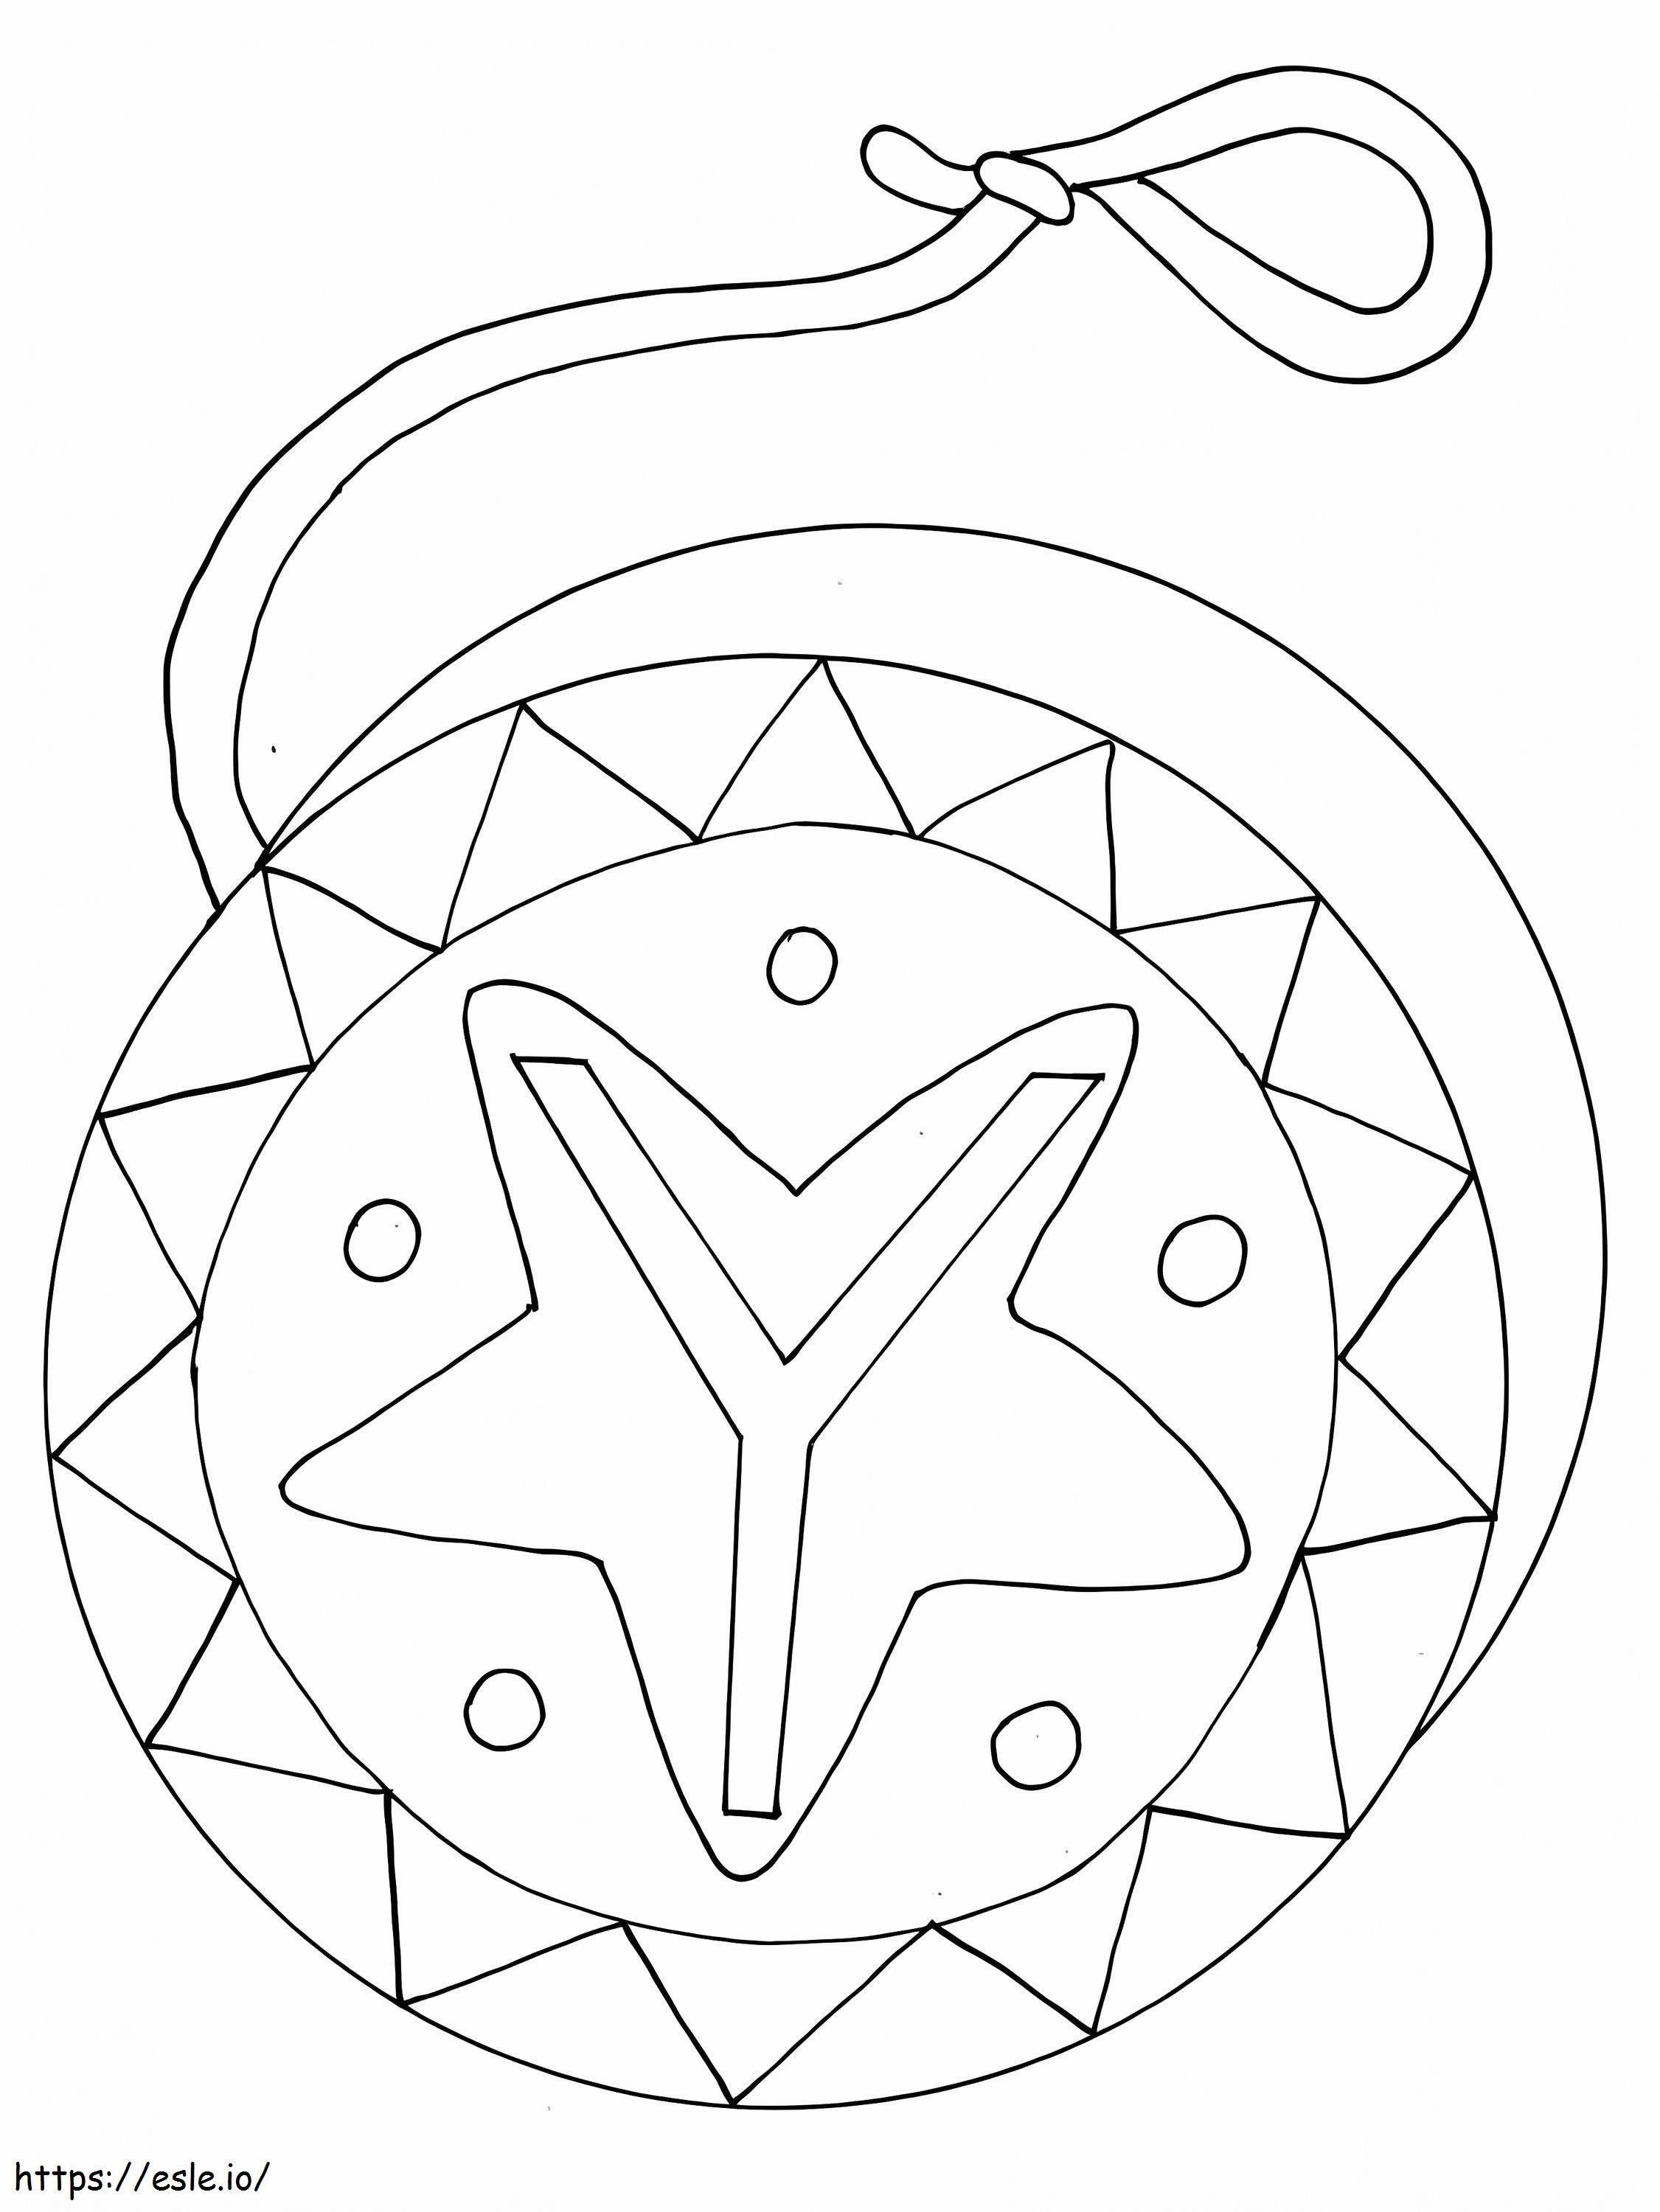 Cool Me Me coloring page